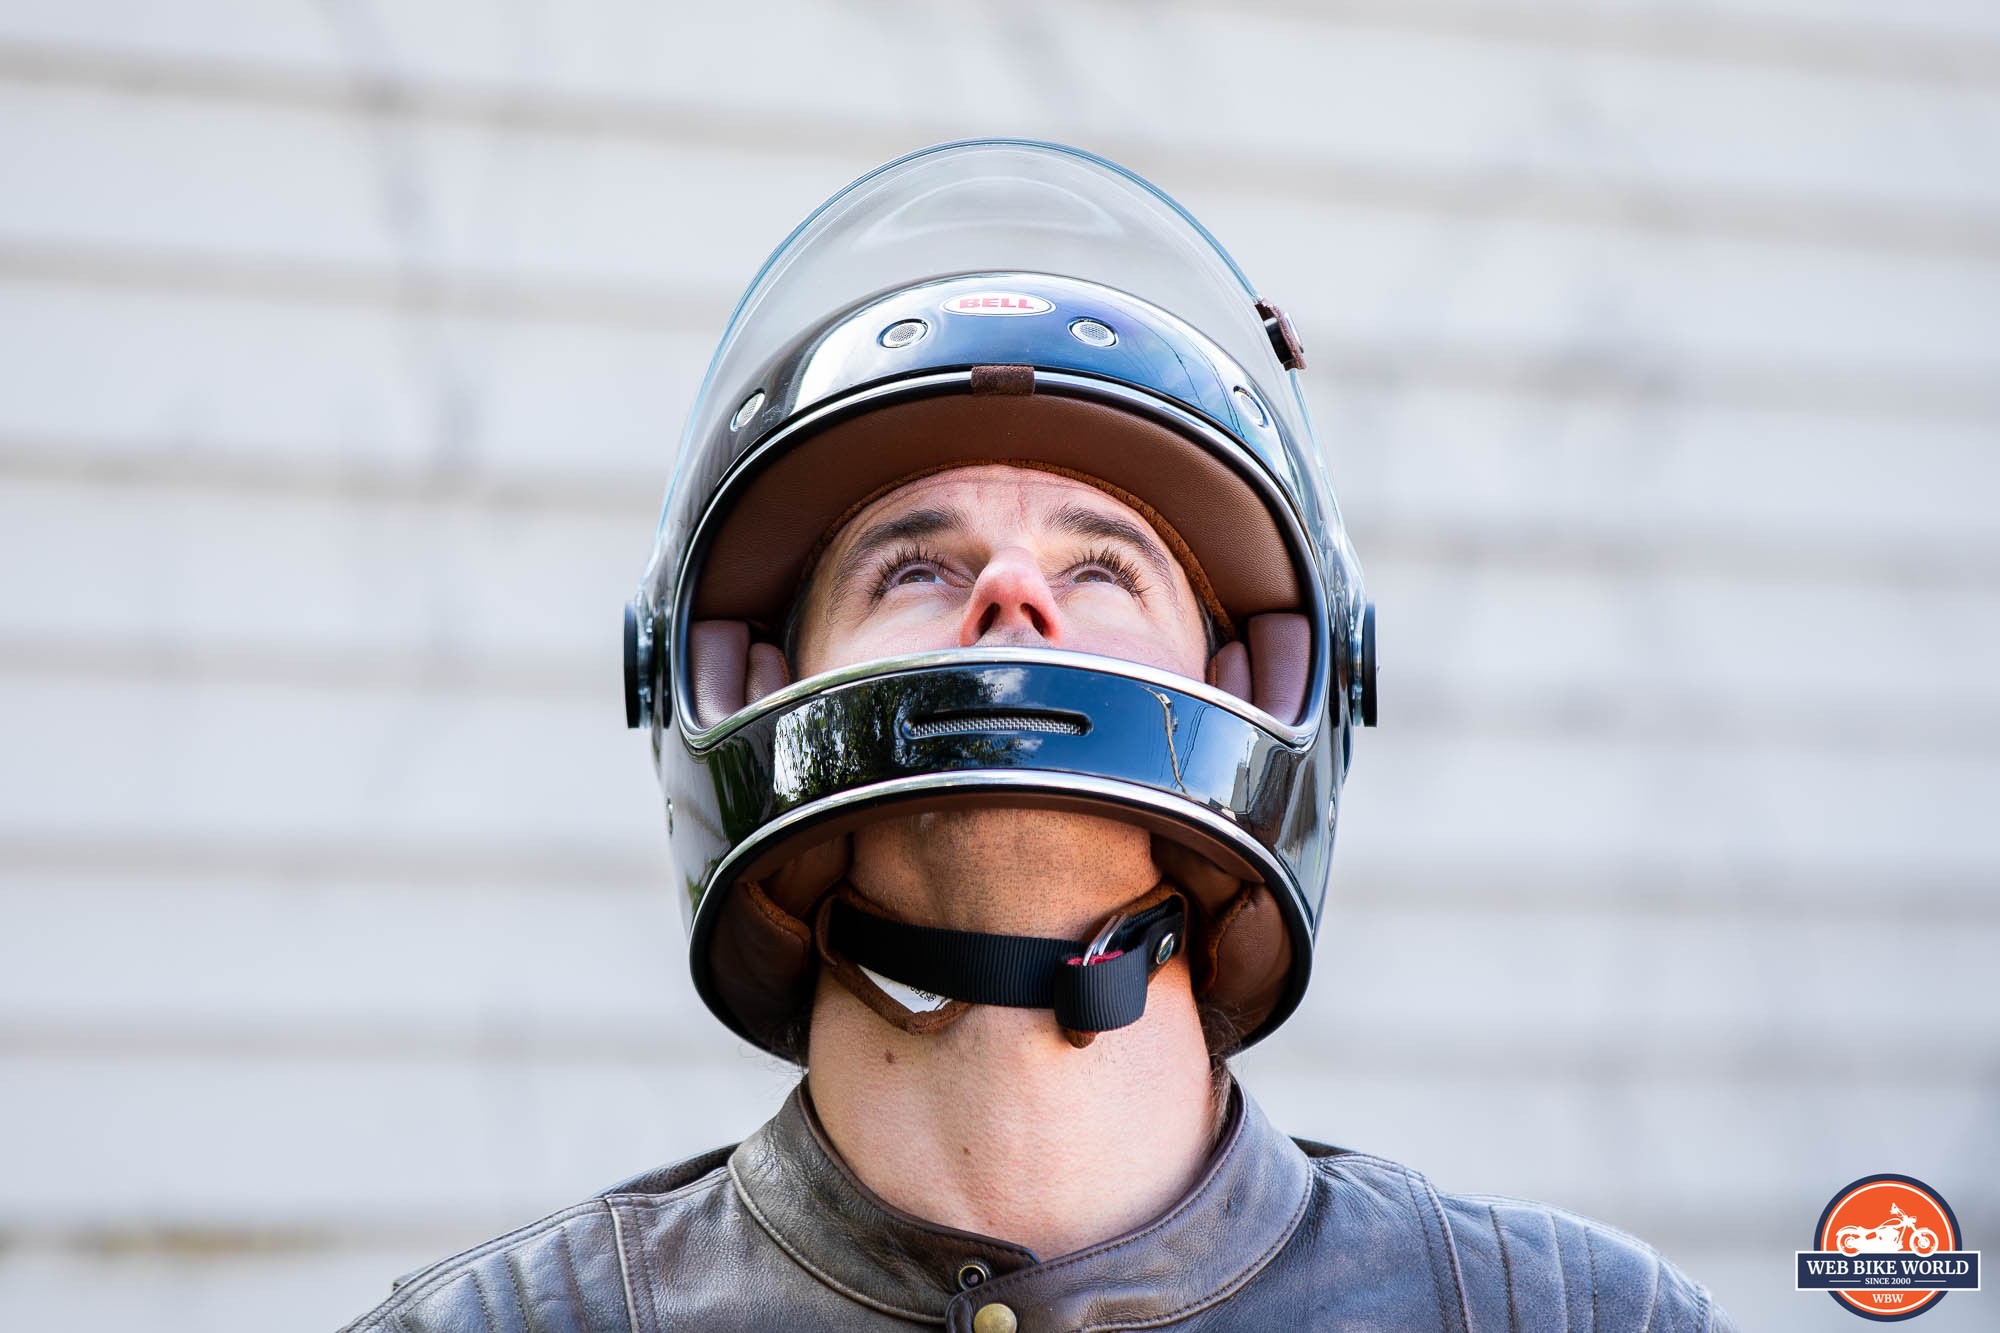 Author wearing Bell Bullitt Helmet with head raised to make chin strap visible